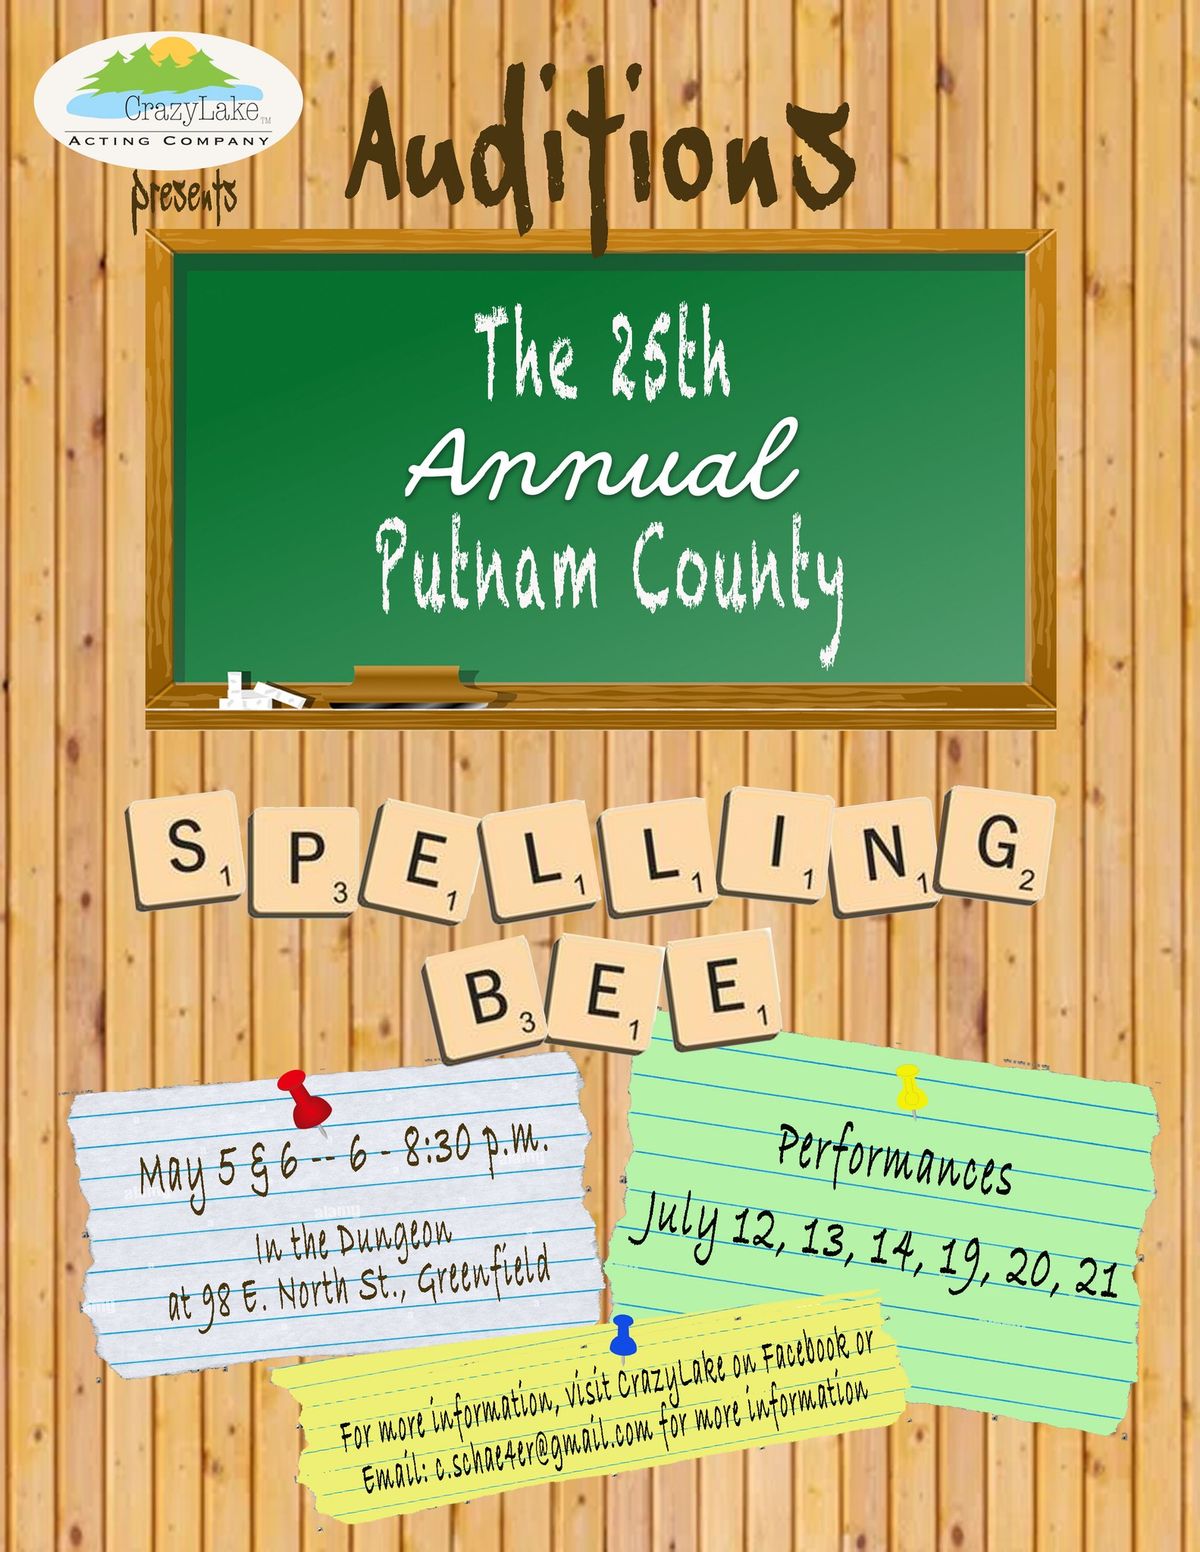 Auditions for "The 25th Annual Putnam County Spelling Bee"